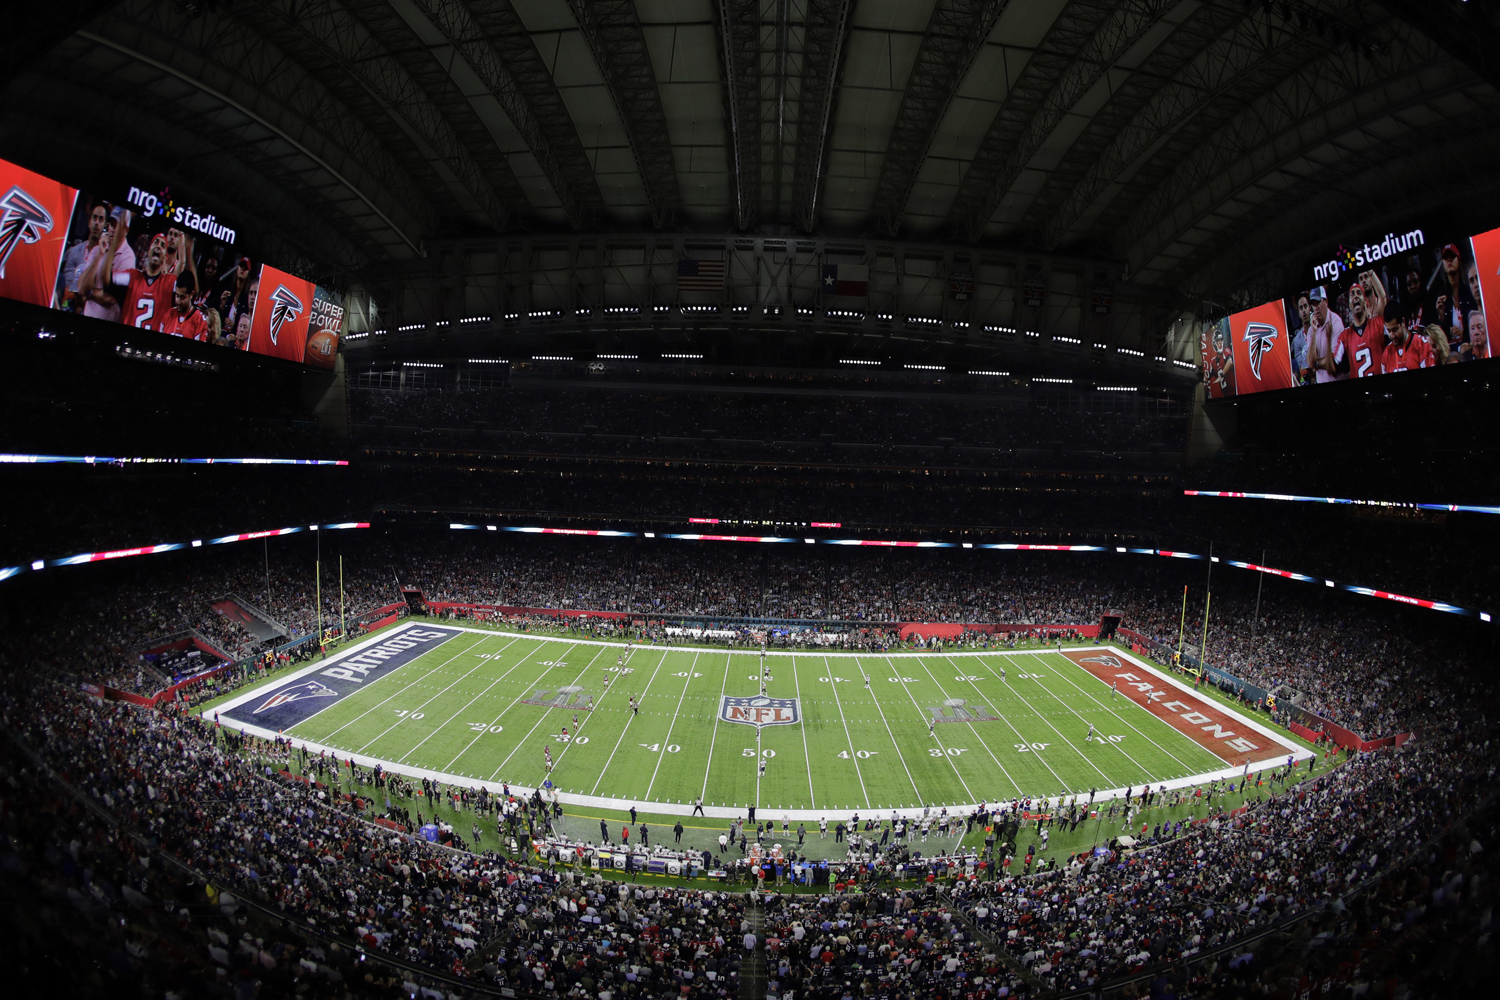 NRG Stadium is seen during the NFL Super Bowl 51 football game between the New England Patriots and the Atlanta Falcons Sunday, Feb. 5, 2017, in Houston. (Charlie Riedel/AP)